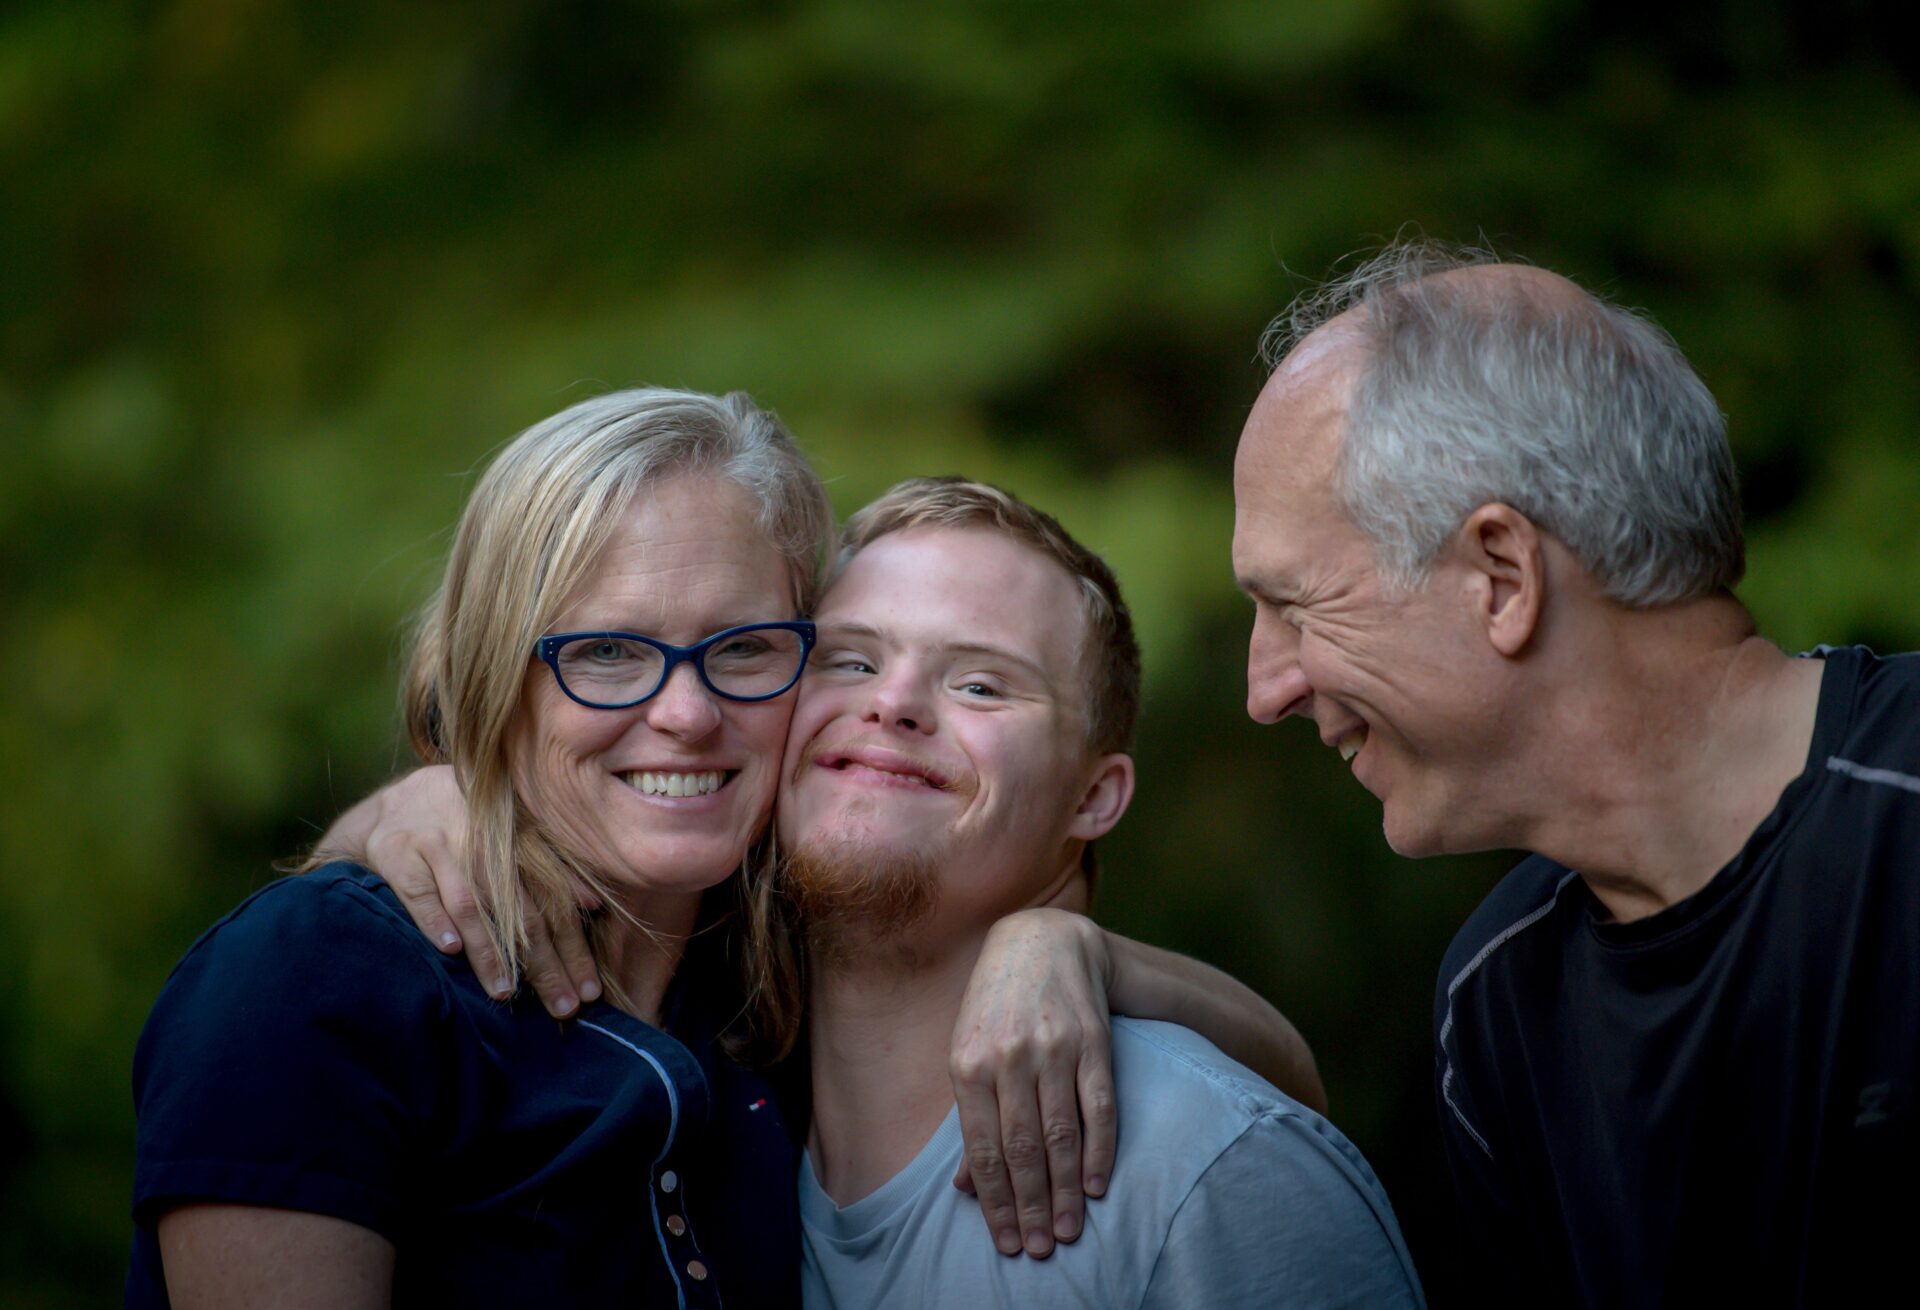 A kid with autism smiling with his parents.